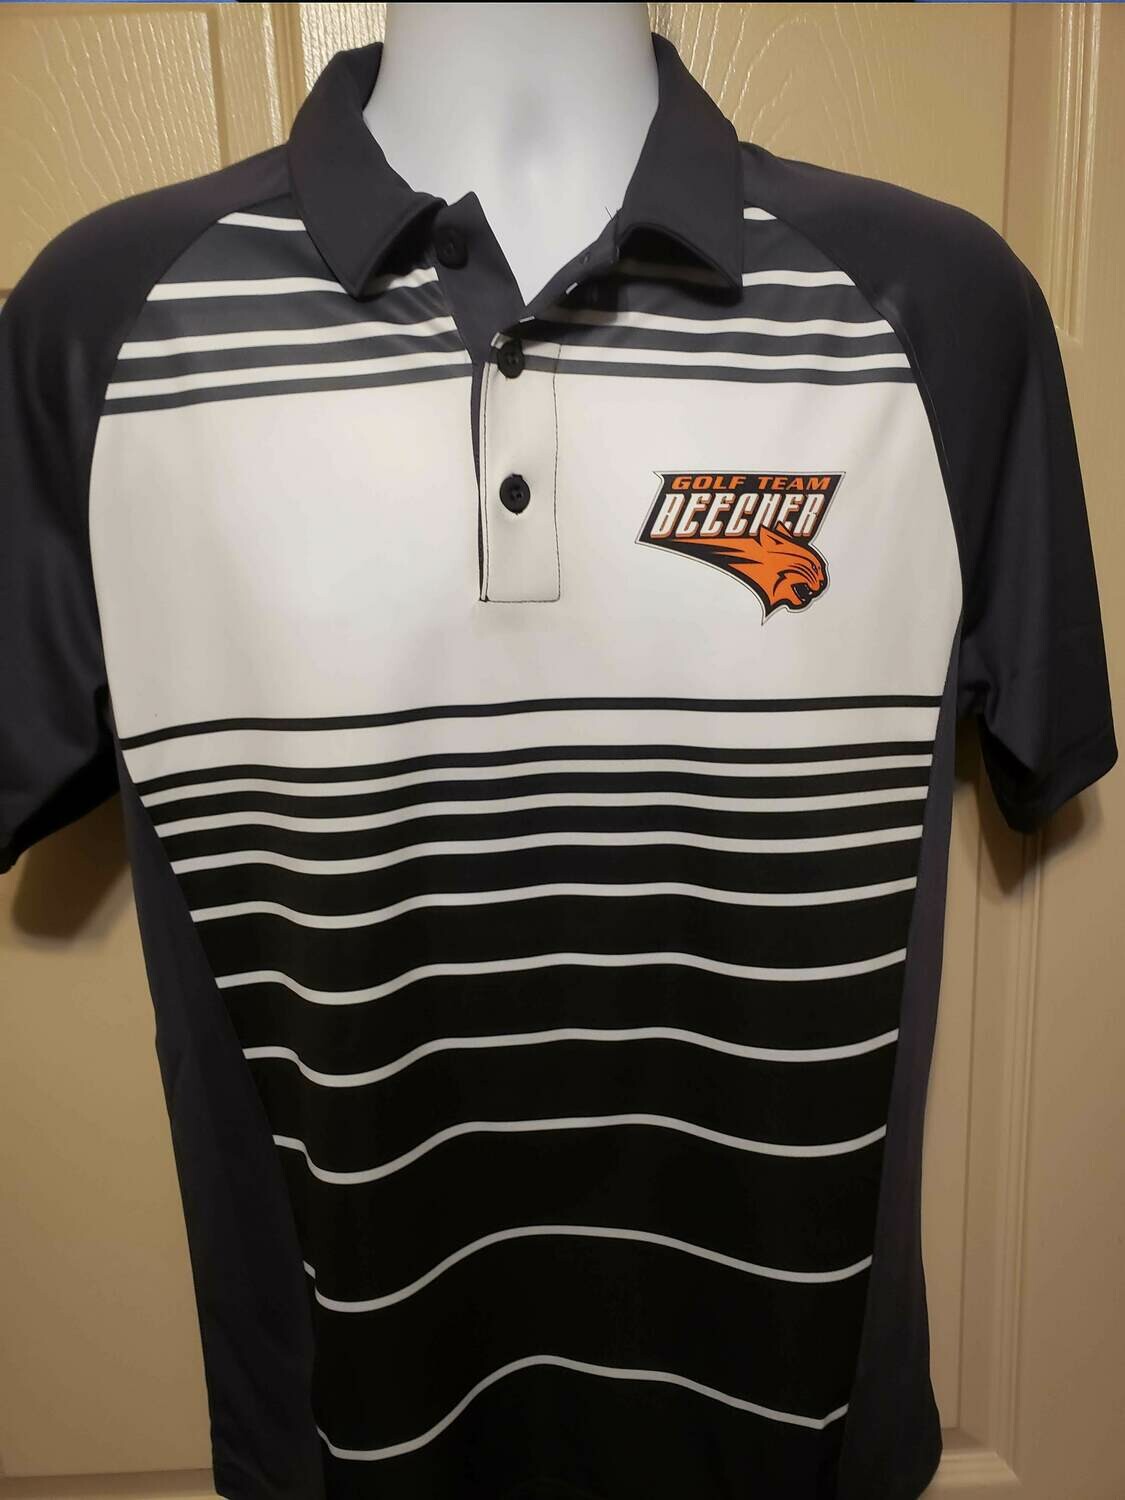 DryZone Sublimated Polo - Beecher Golf or other logo.